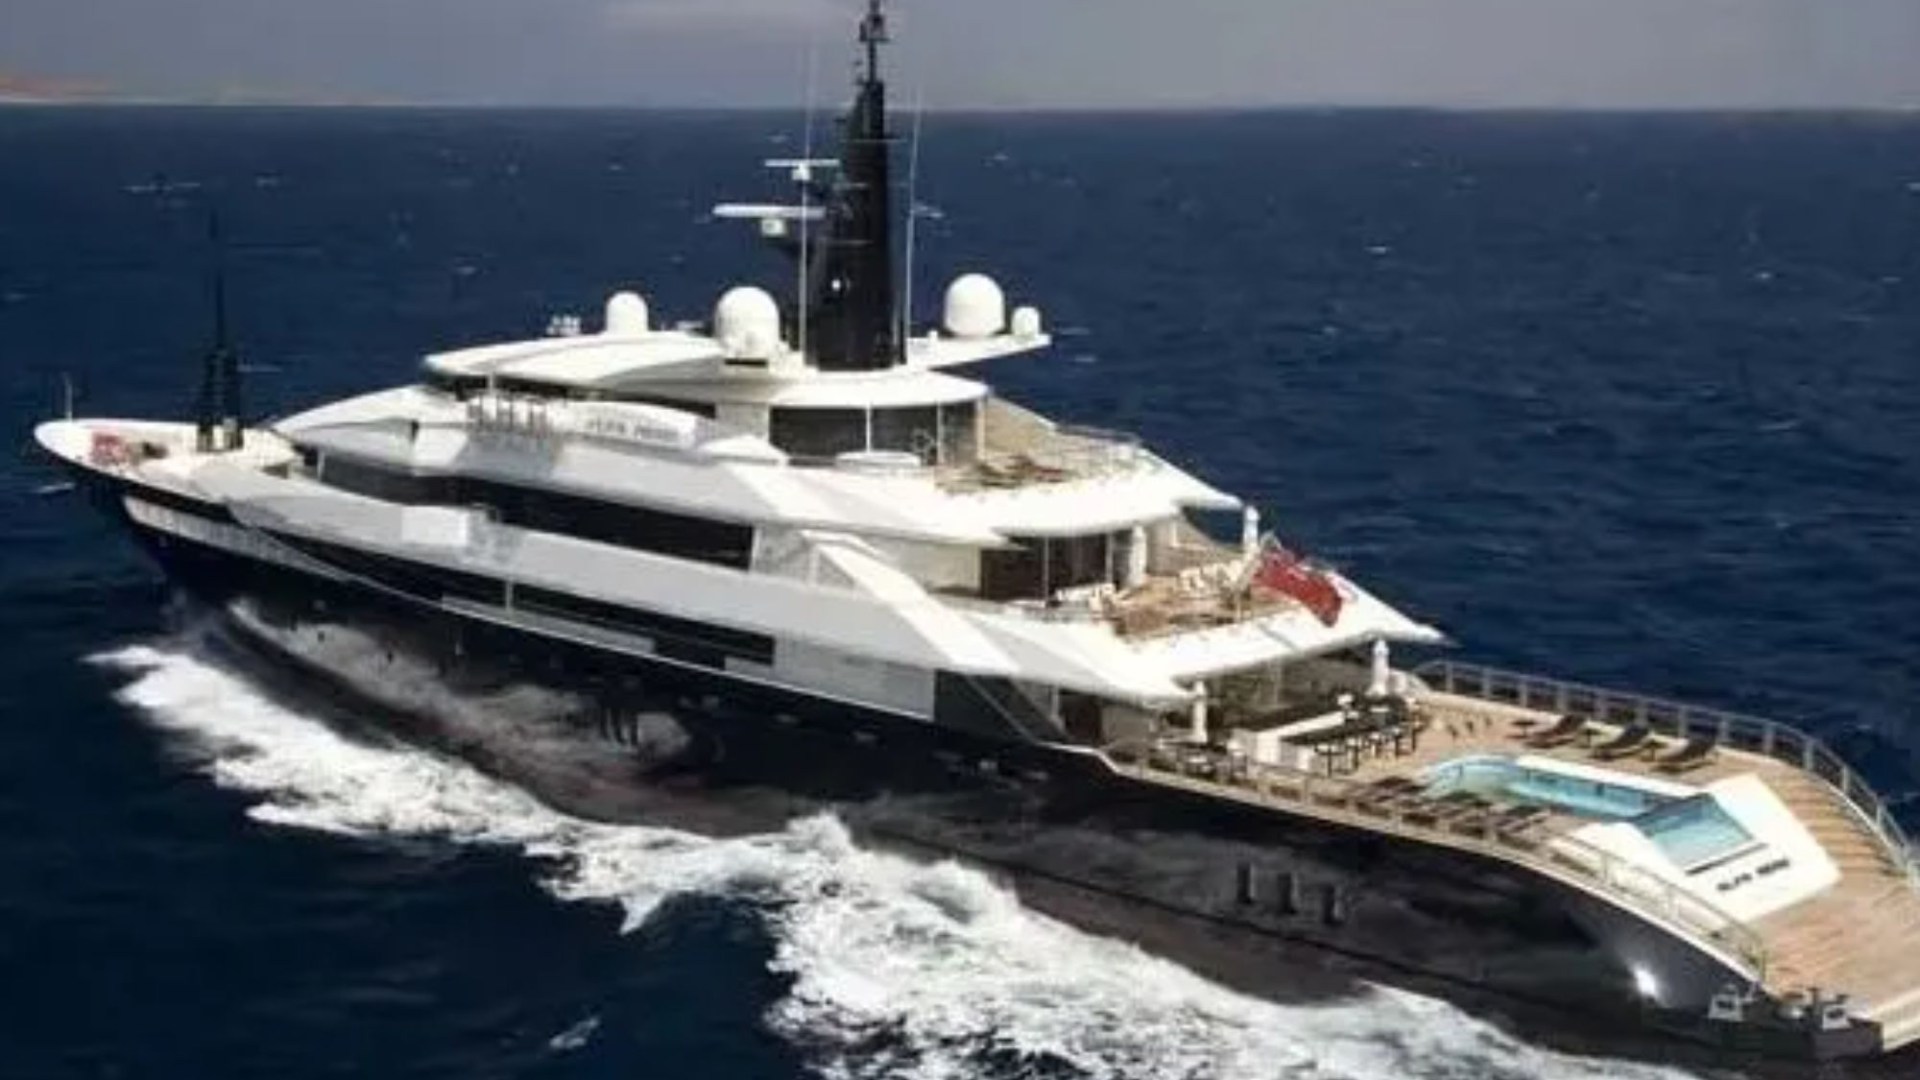 Abandoned 100m megayacht ‘seized from Putin pal’ finally sold to mystery buyer after 2 years but for fraction of price [Video]